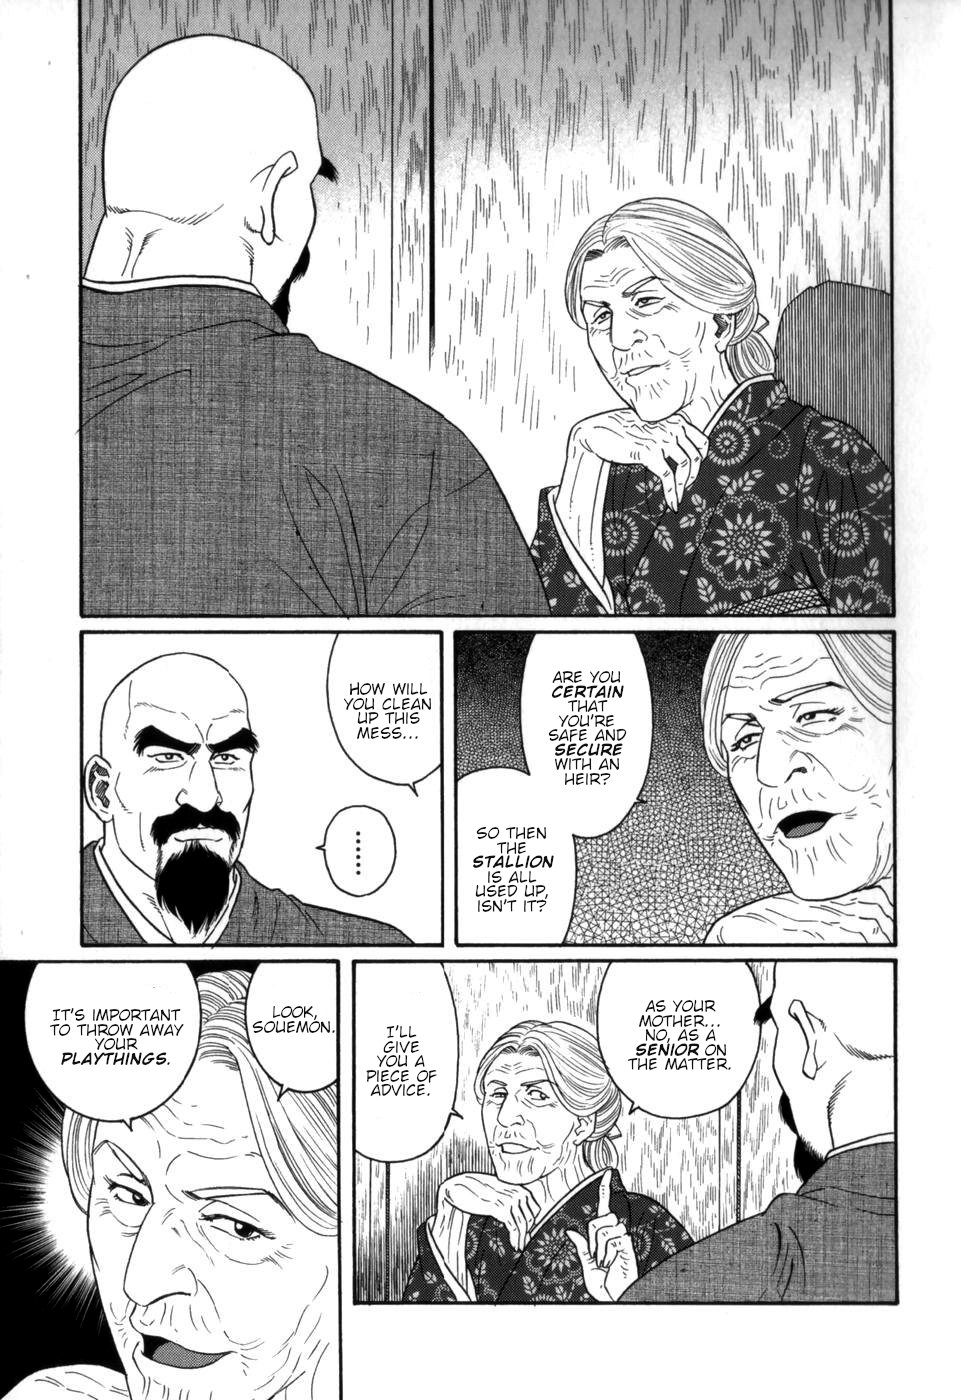 [Tagame Gengoroh] Gedou no Ie Chuukan | House of Brutes Vol. 2 Ch. 3 [English] {tukkeebum} - Page 17